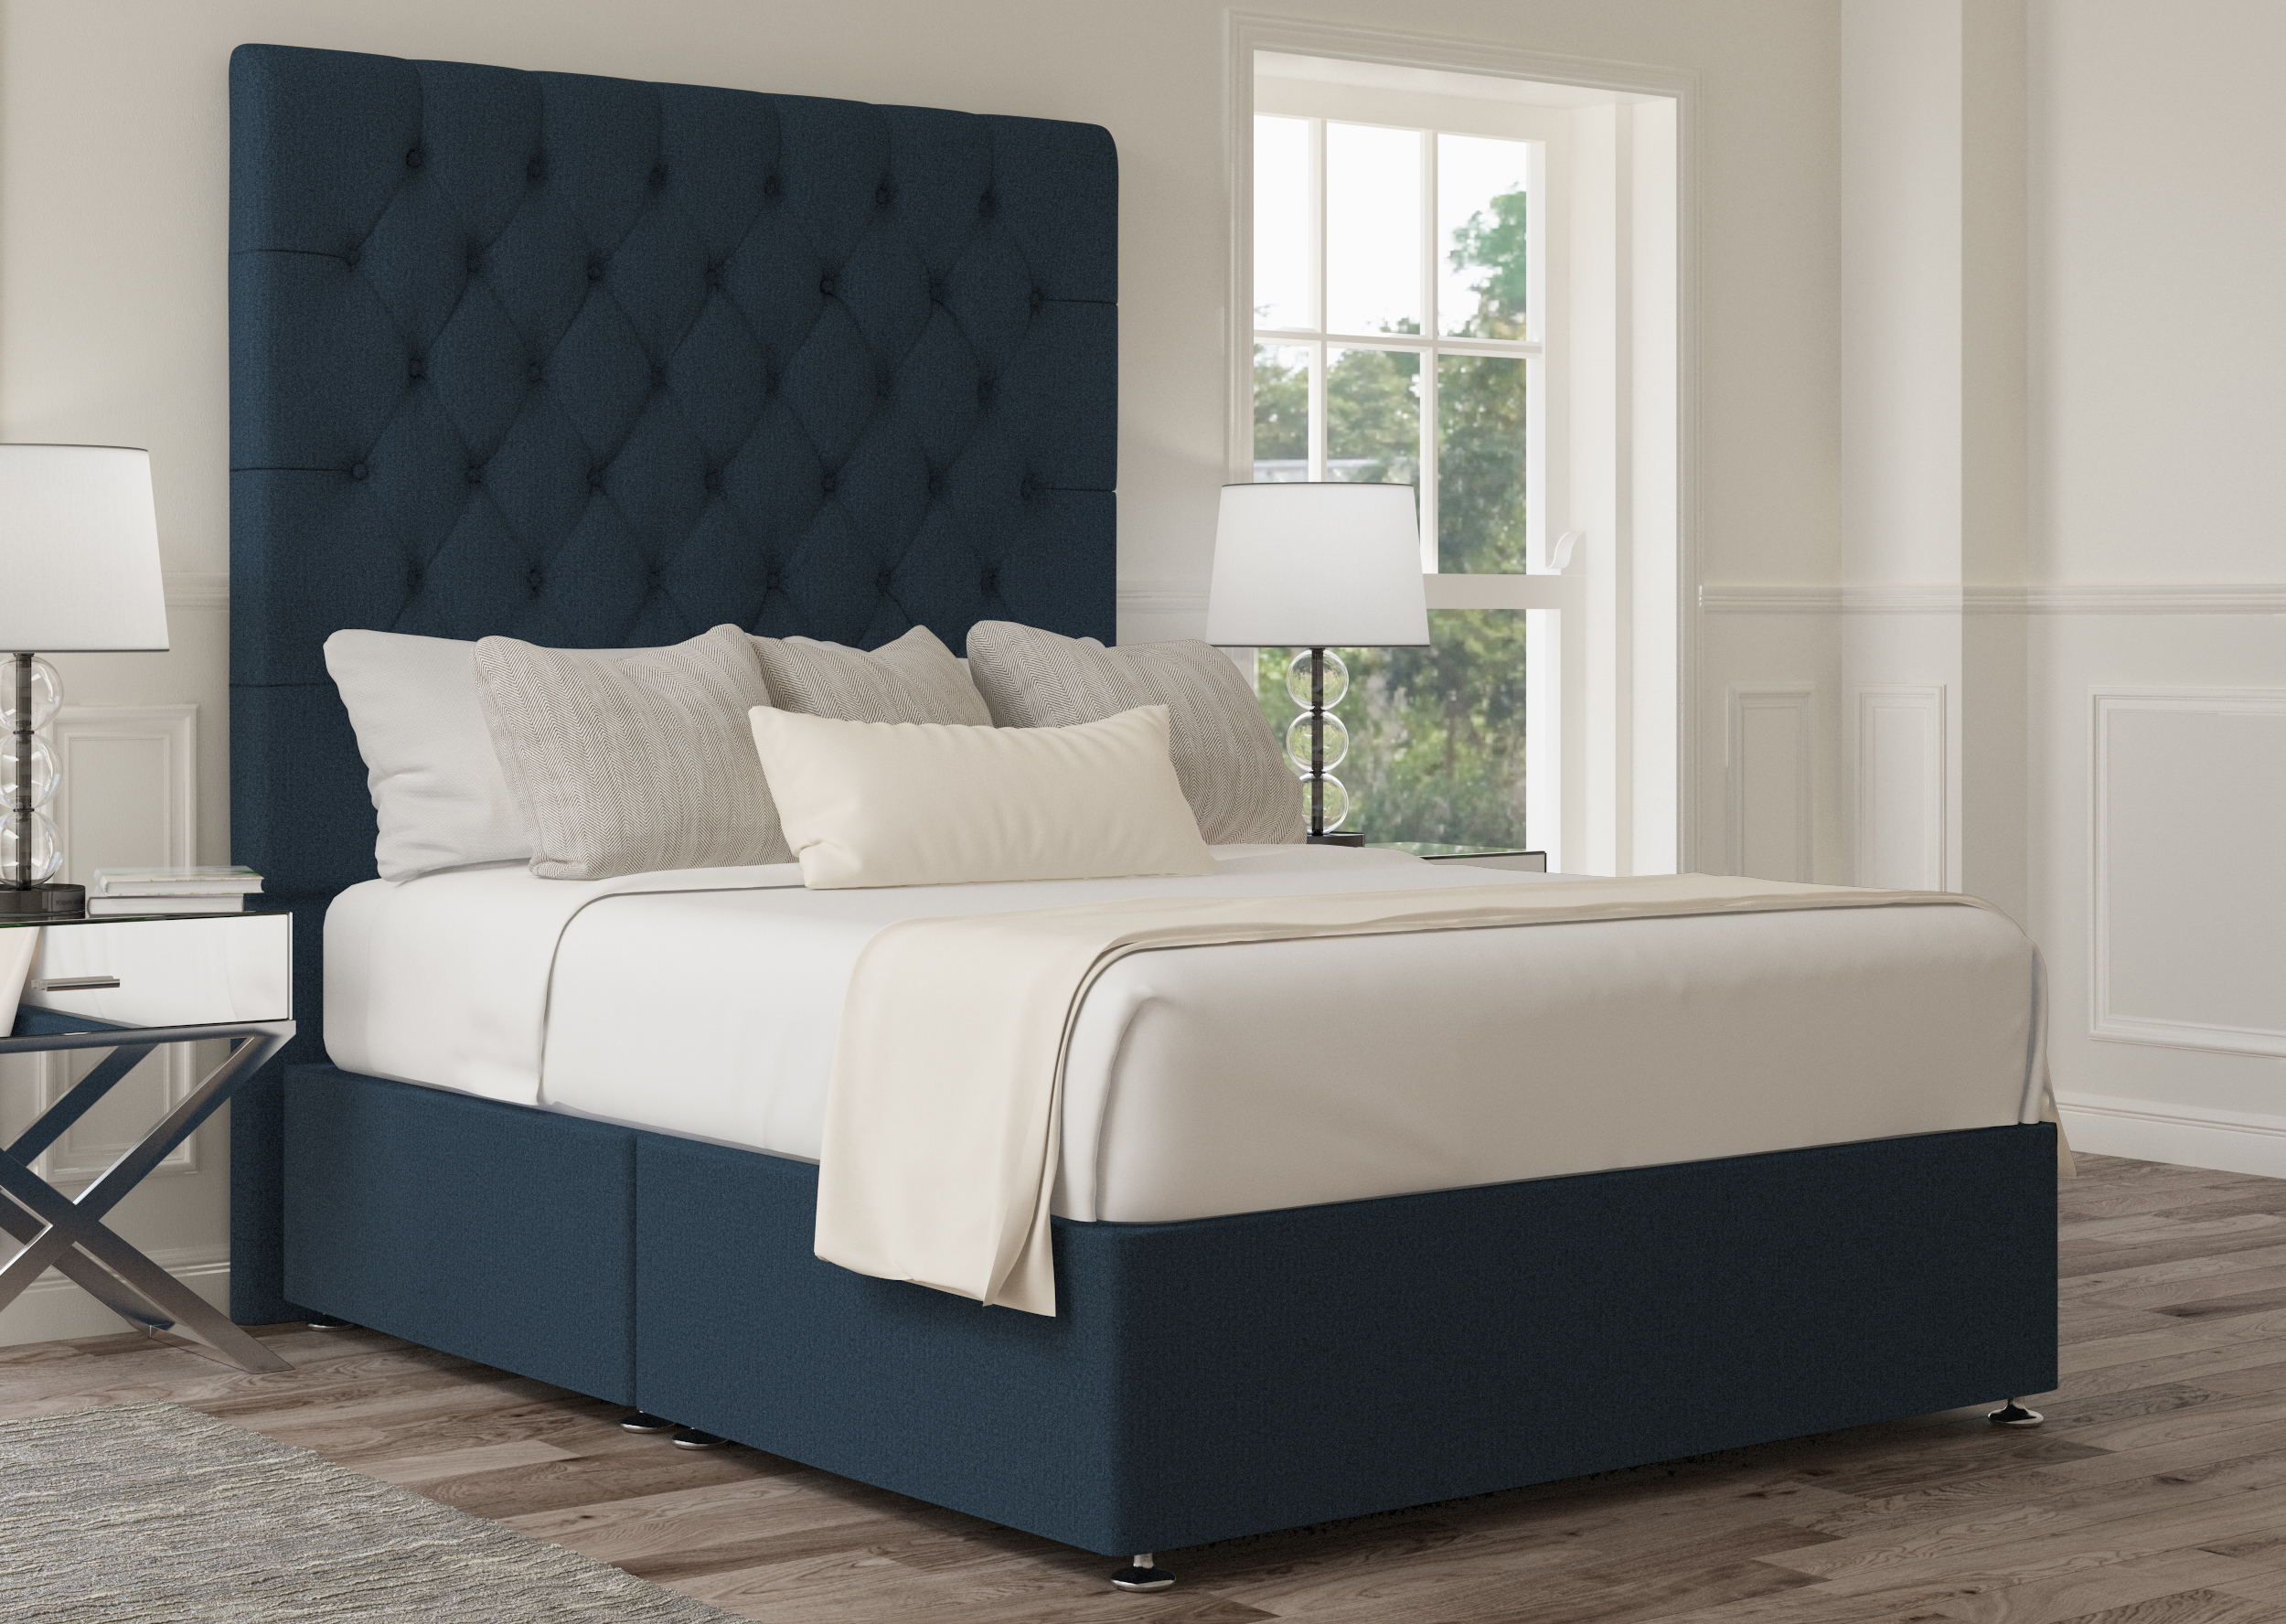 View Sephora Arran Natural Upholstered Double Bed Time4Sleep information